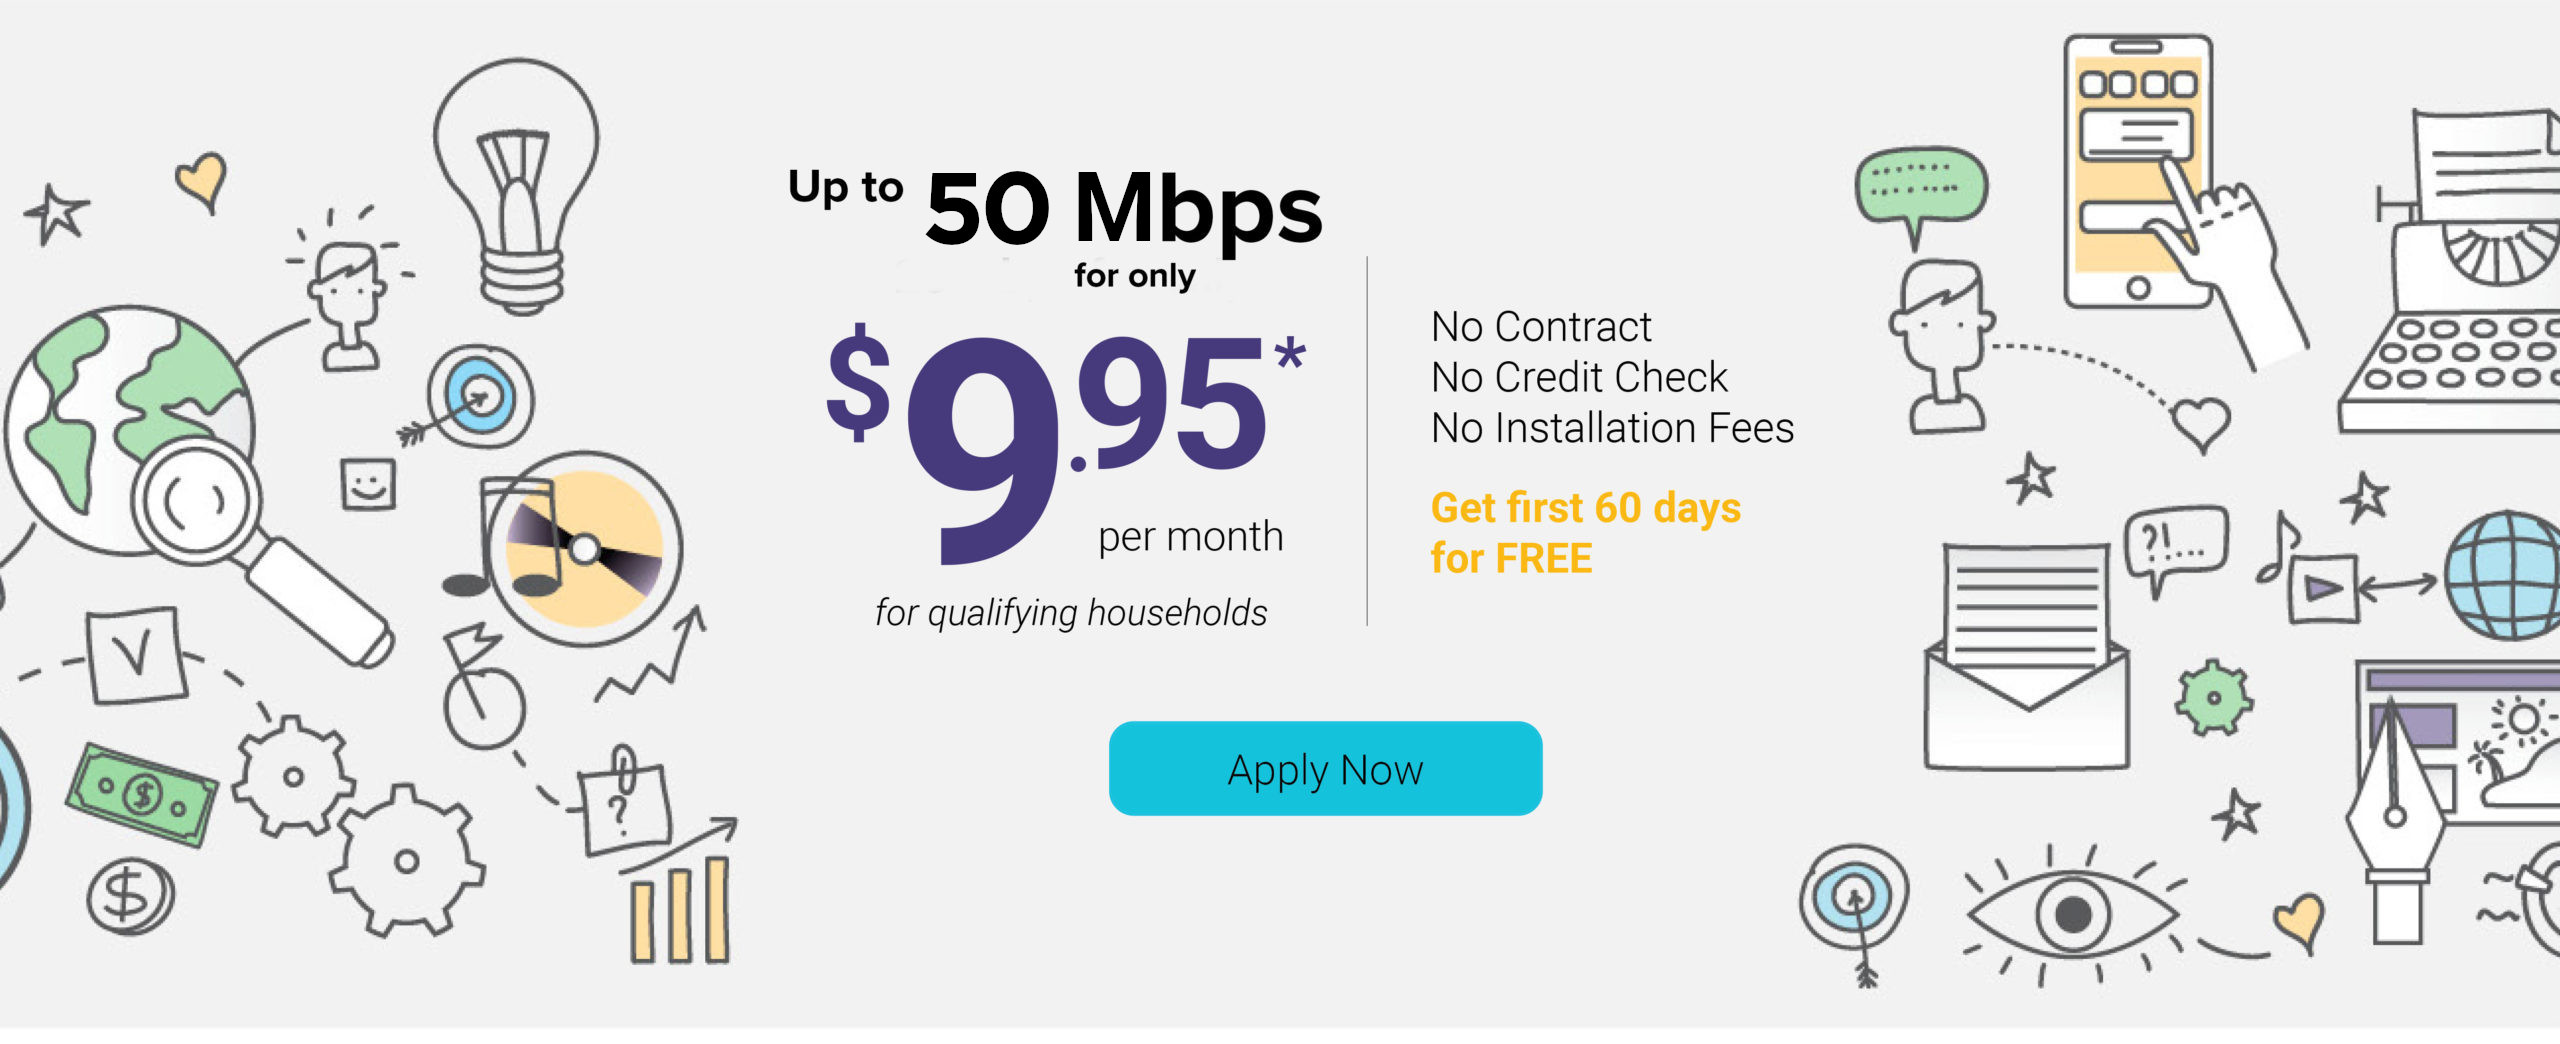 Up to 50 mbps for only $9.95 per month for qualifying households. No Contract. No credit check. No installation fees. Get first 60 days for free. Apply now